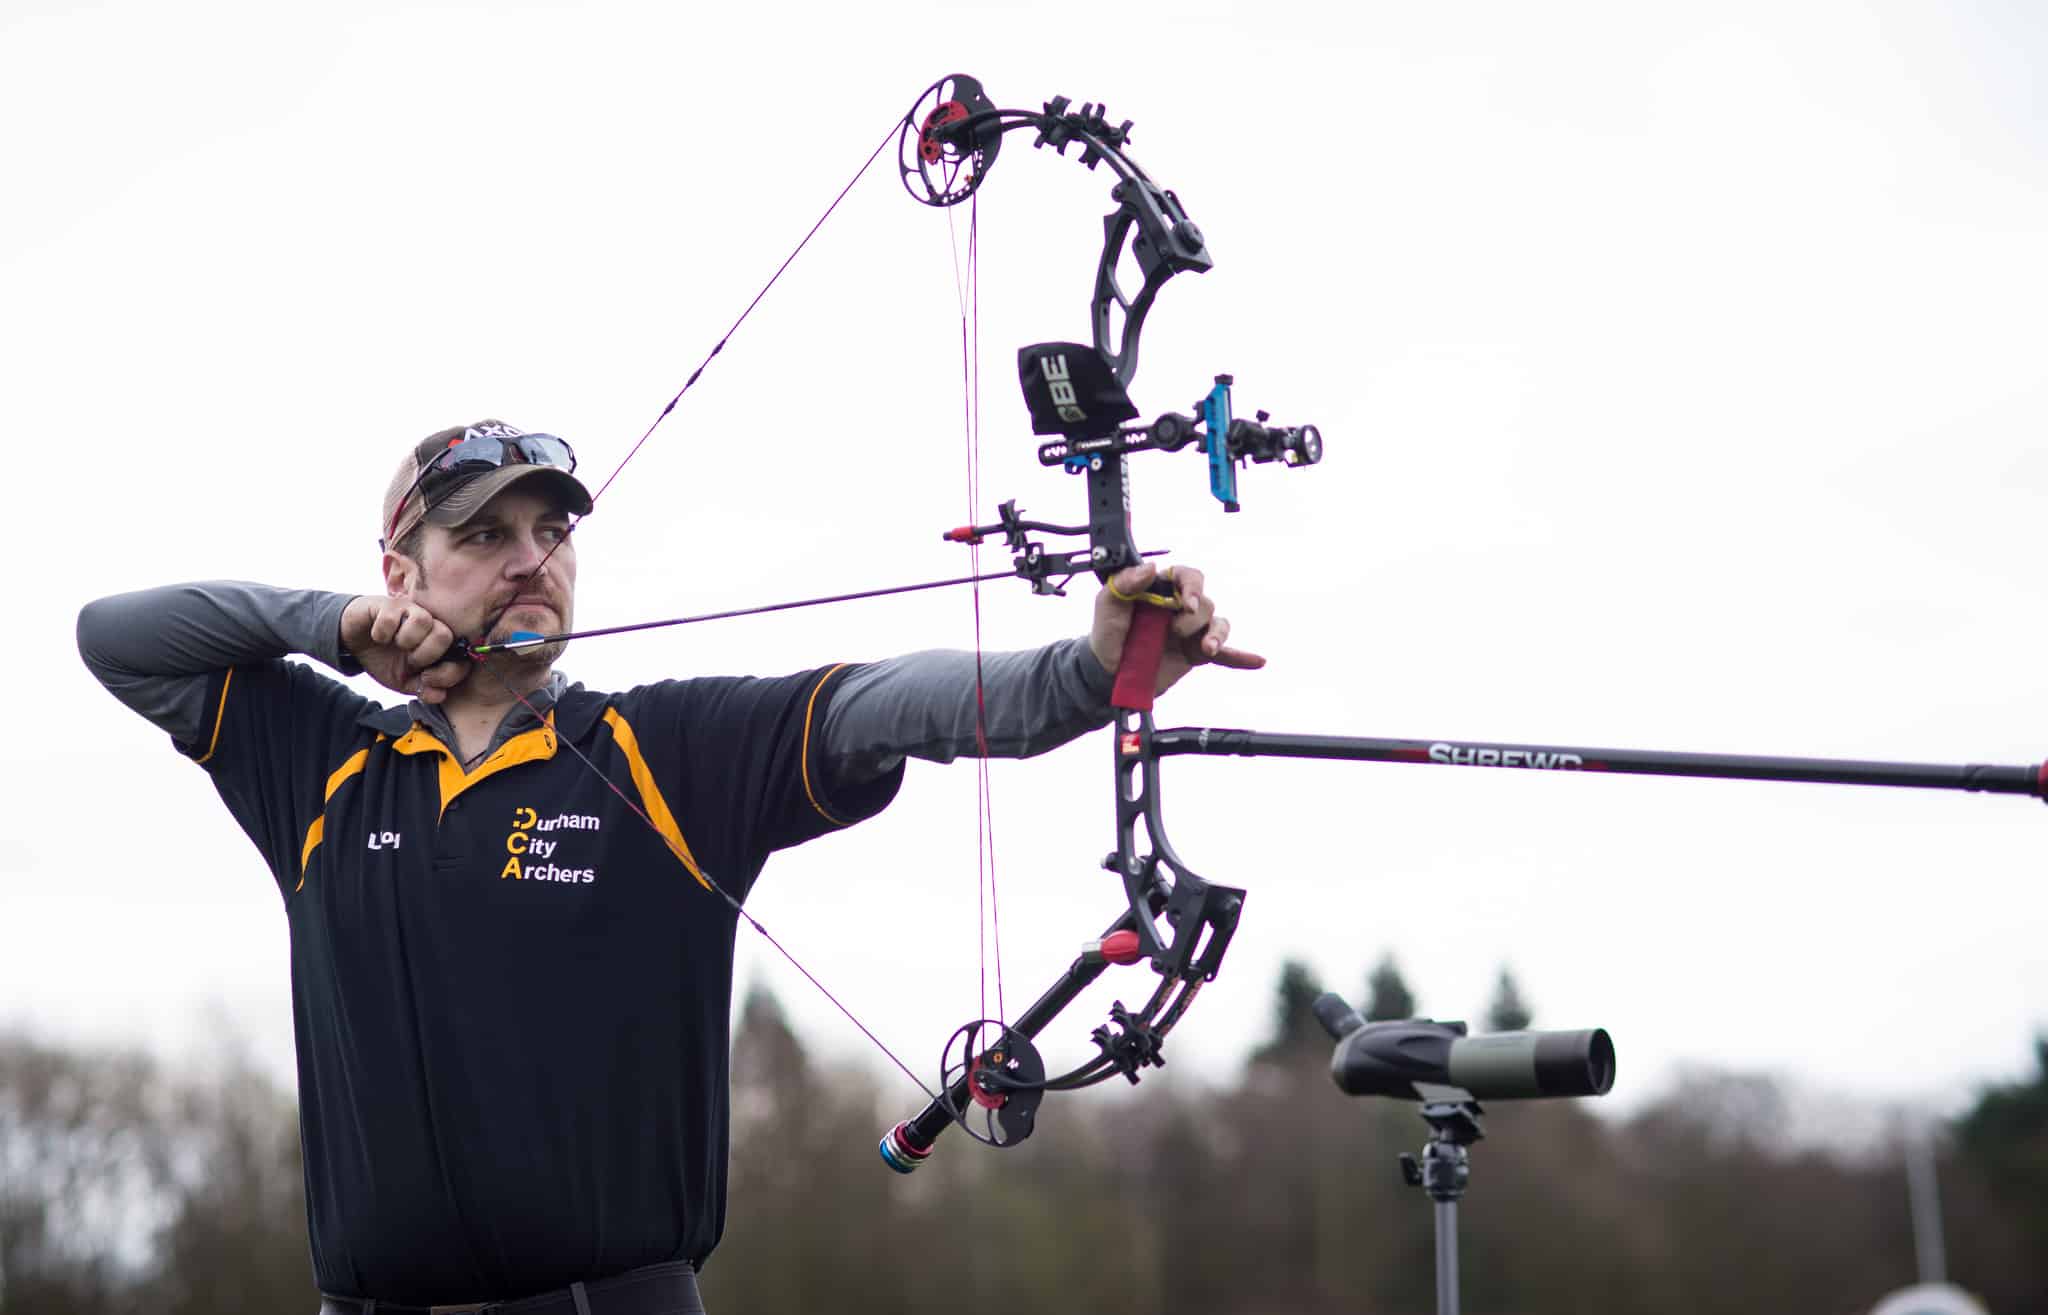 how-to-shoot-a-compound-bow-and-arrow-better-properly-accurately